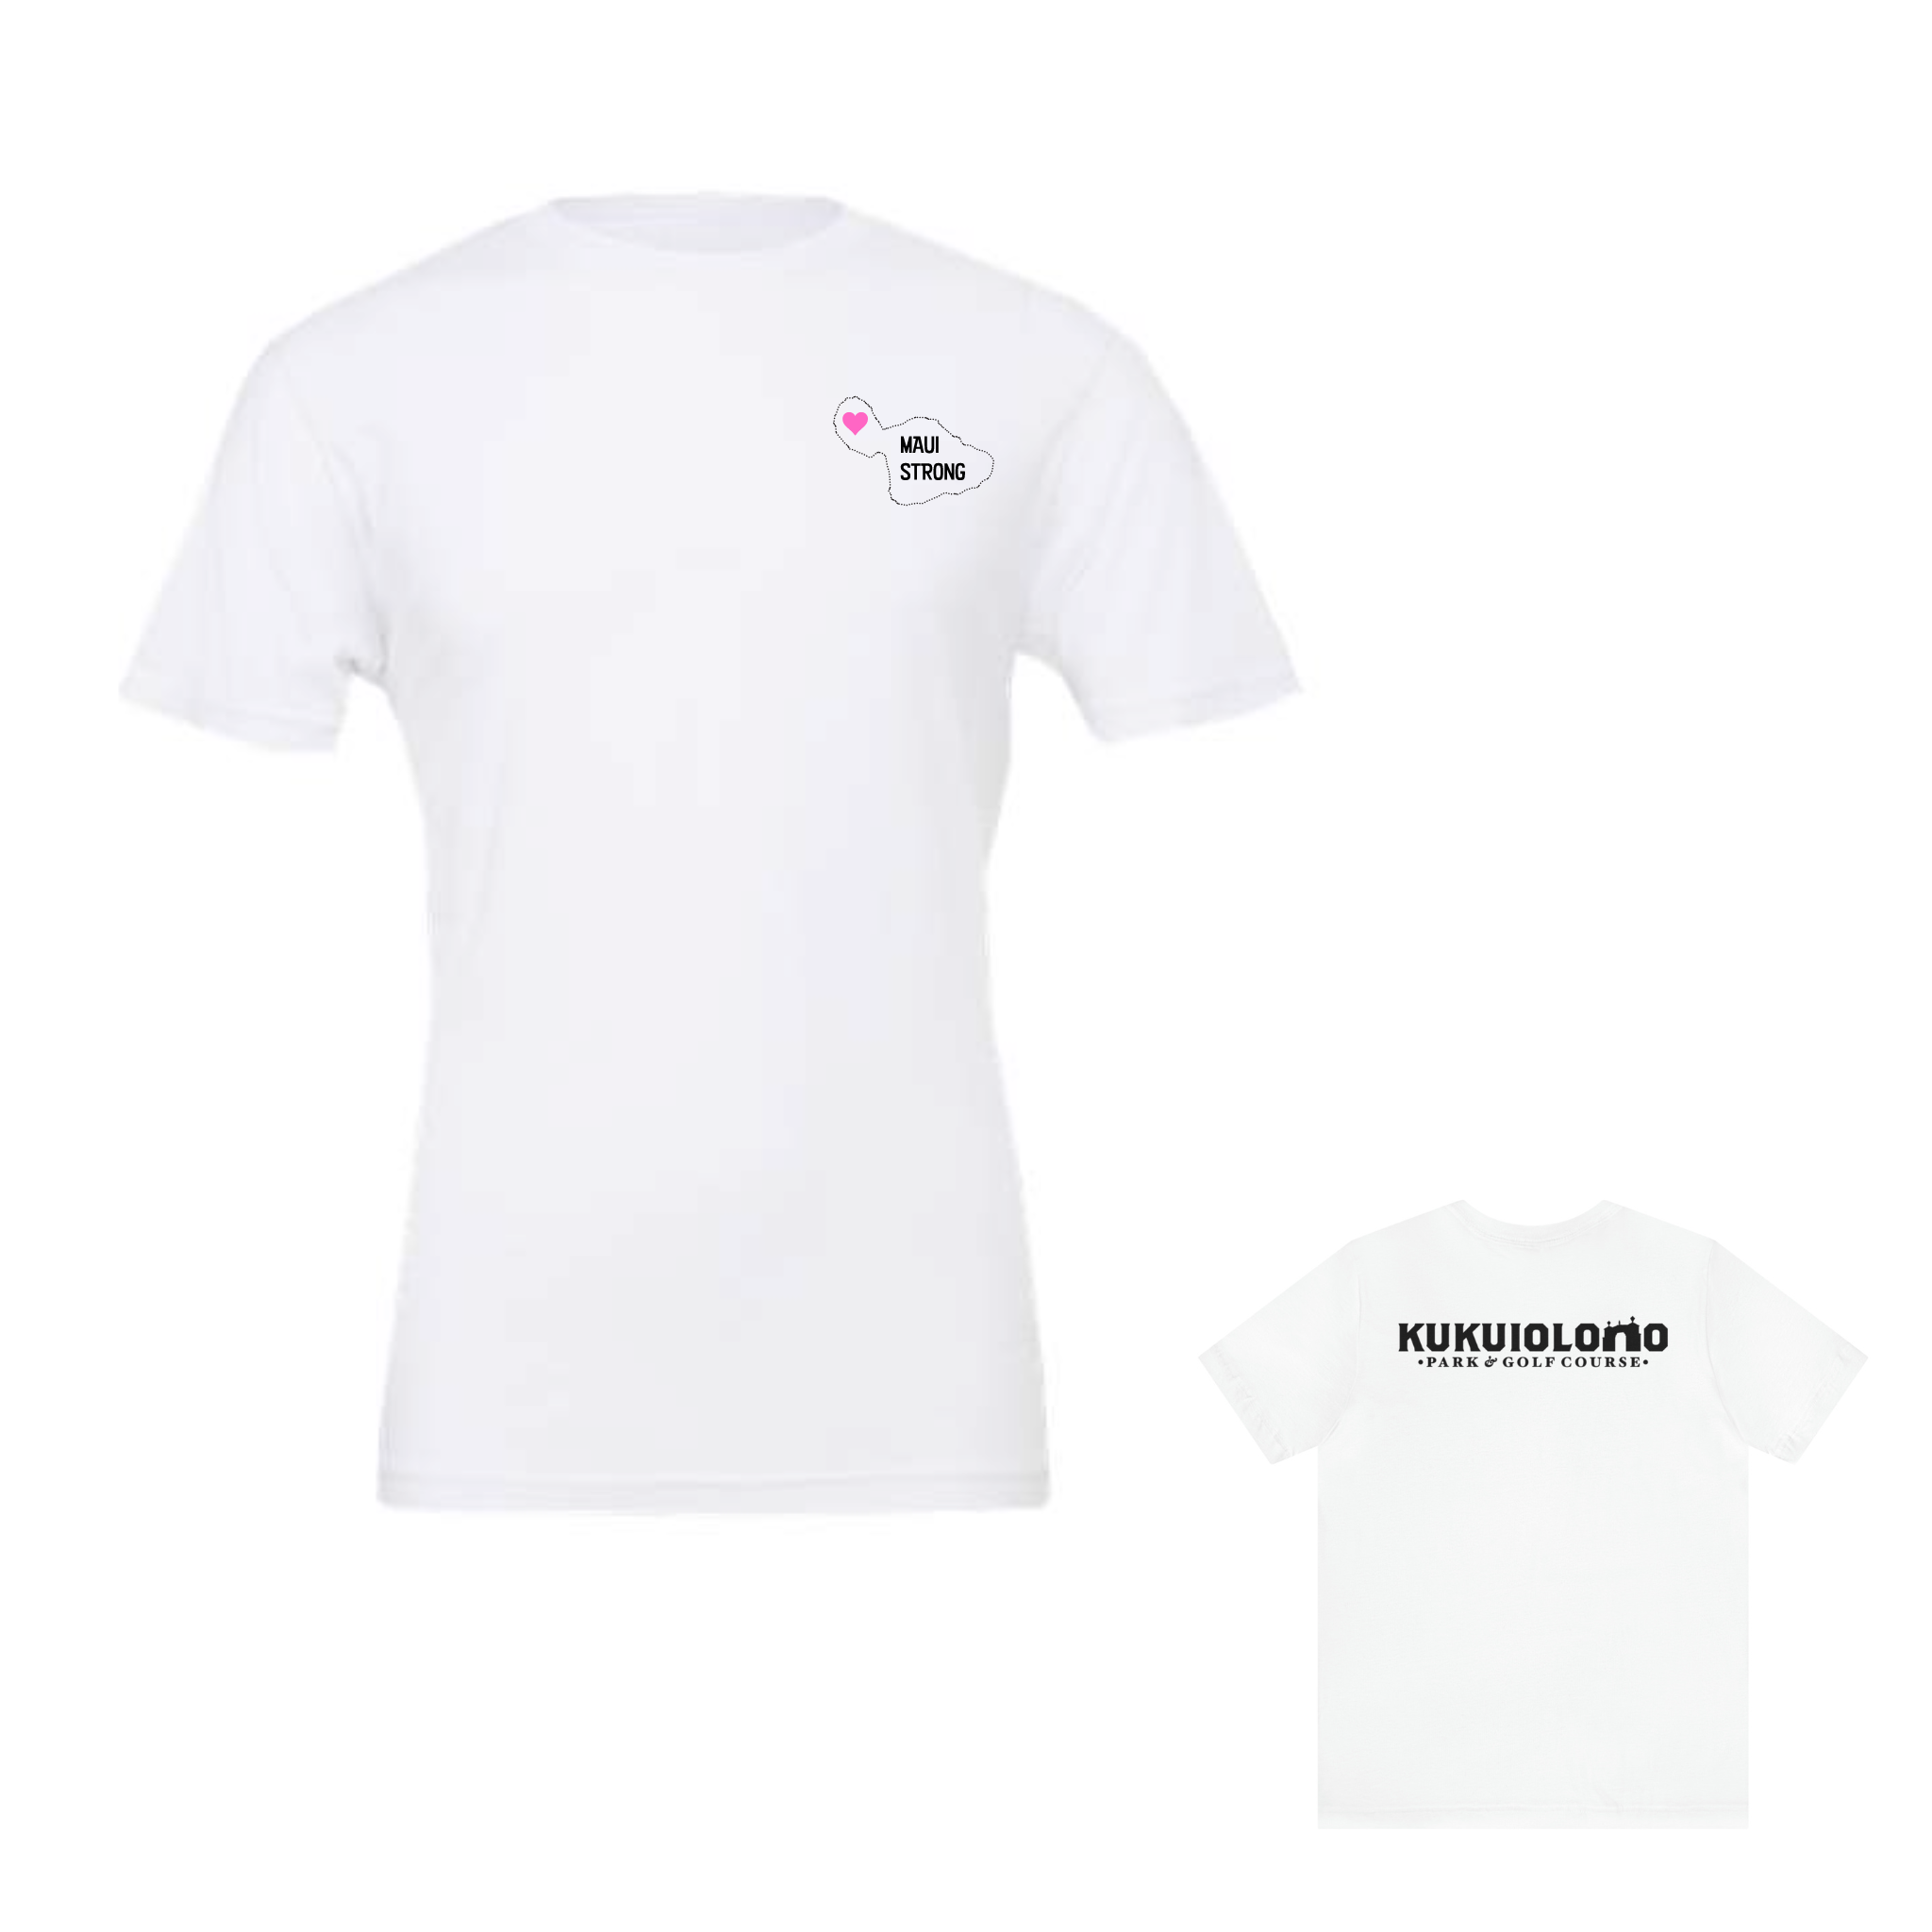 Youth Short Sleeve Tee - Maui Strong + Kukuiolono Park and Golf Course